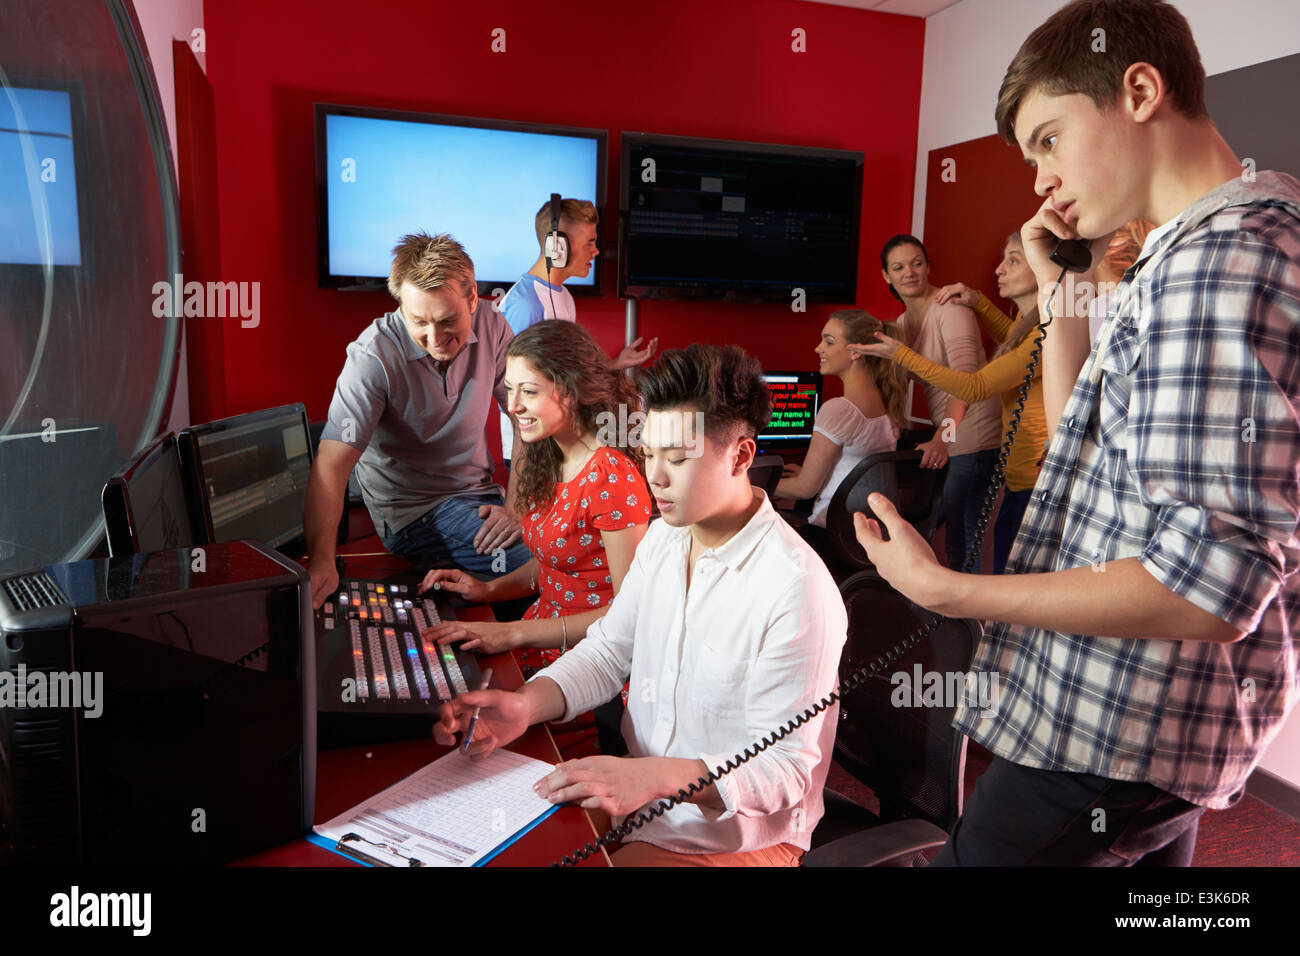 Group Of Media Students Working In Film Editing Class Stock Photo